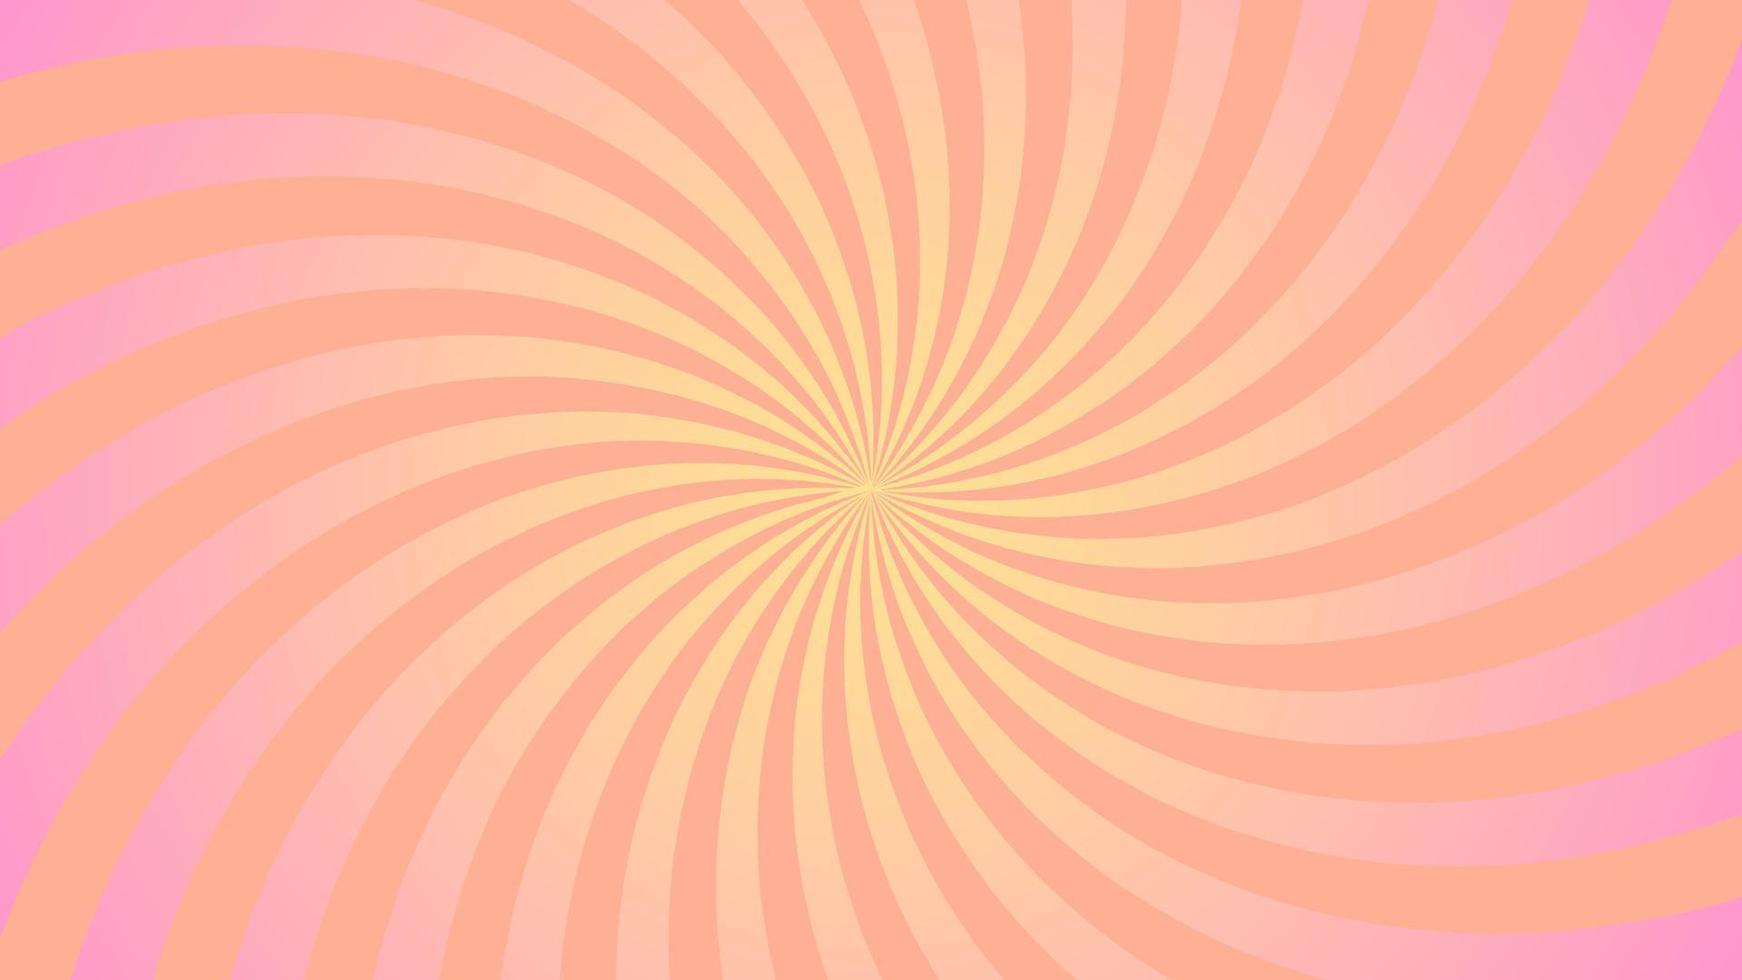 gradient pink and yellow spin spiral sunburst background illustration, perfect for backdrop, wallpaper, banner, postcard, background for your design vector